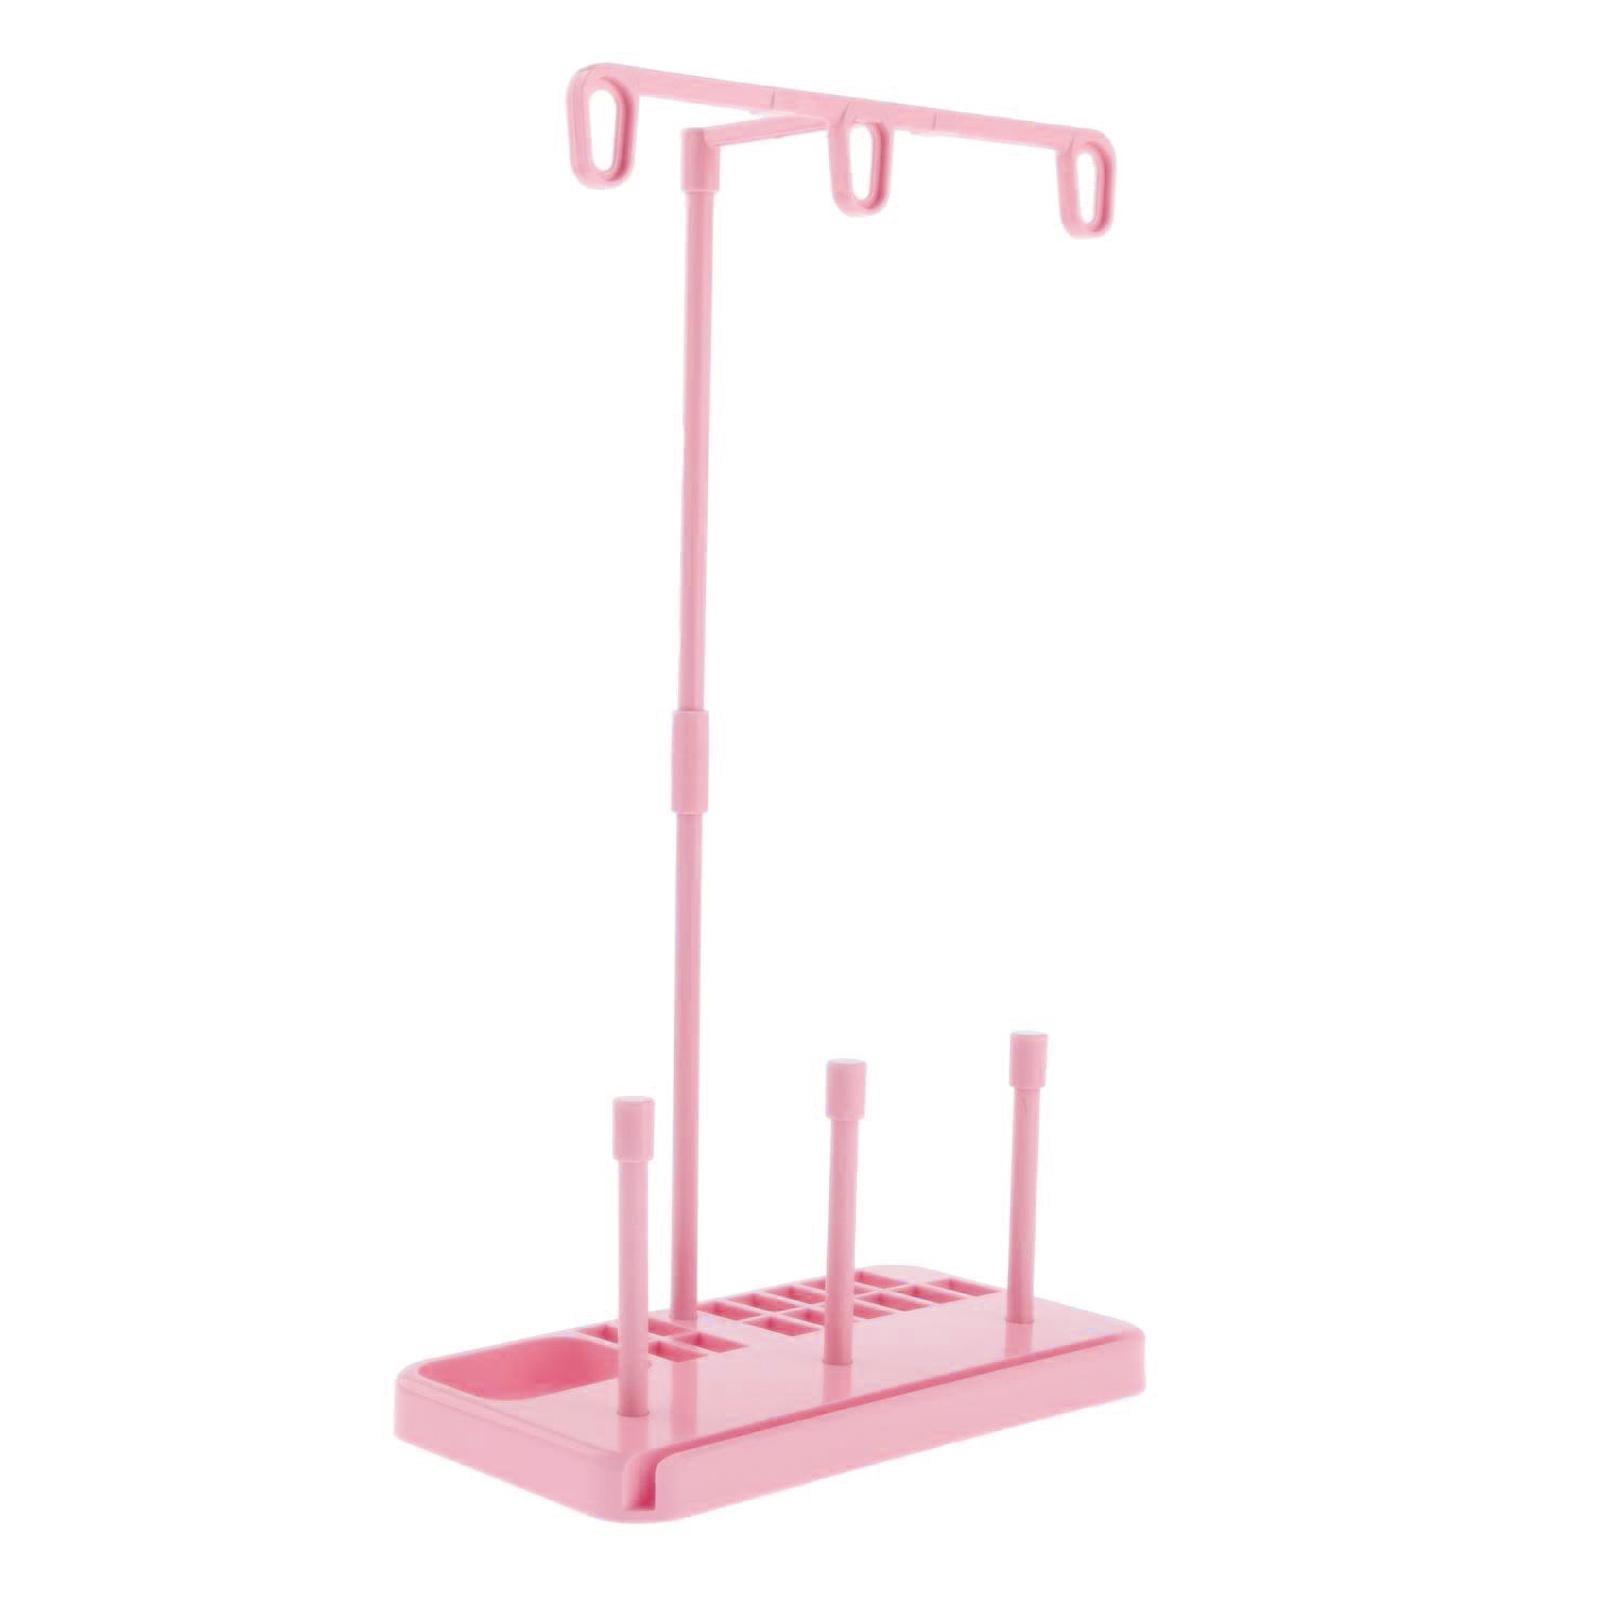 Single Cone Spool Stand Alone Cast Iron Thread Holder Fits for Sewing  Embroidery Serger 